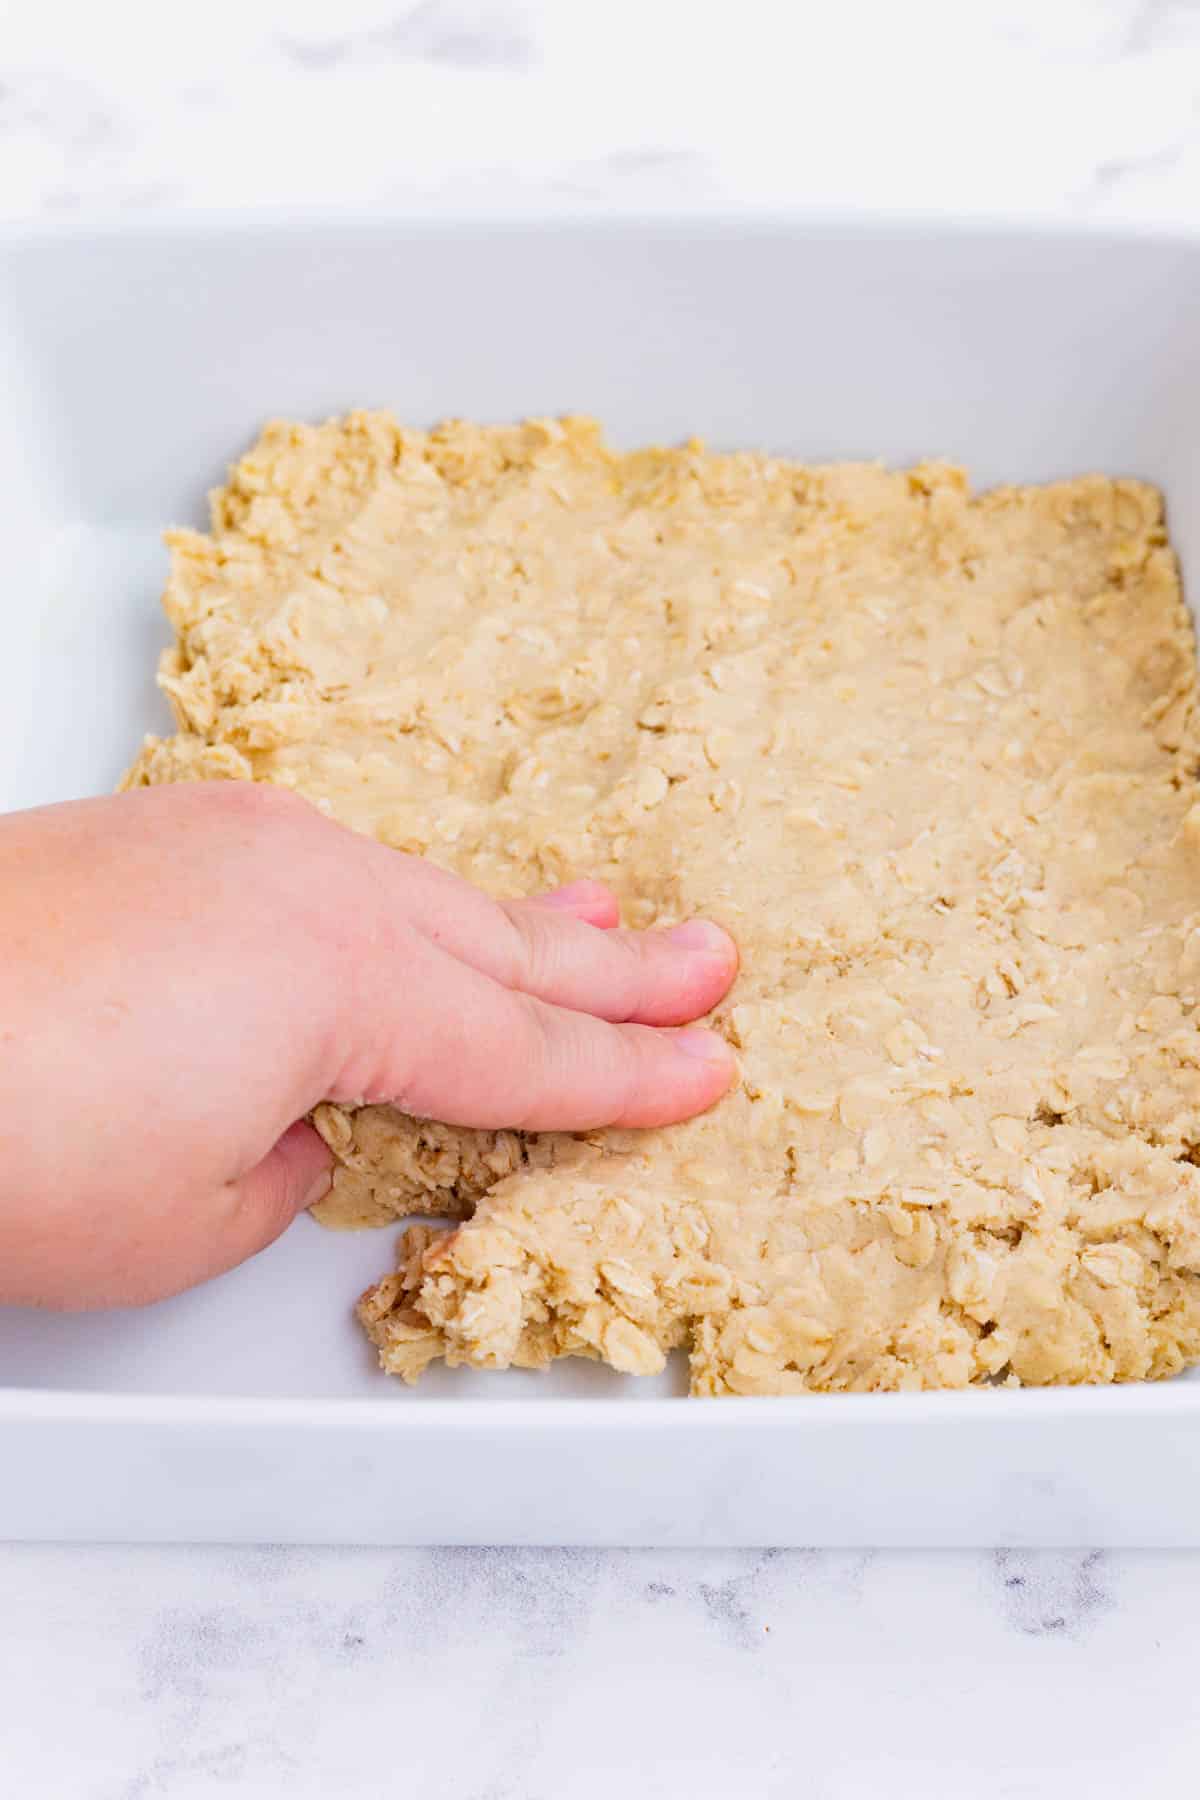 Shortbread dough is pressed into a baking dish.